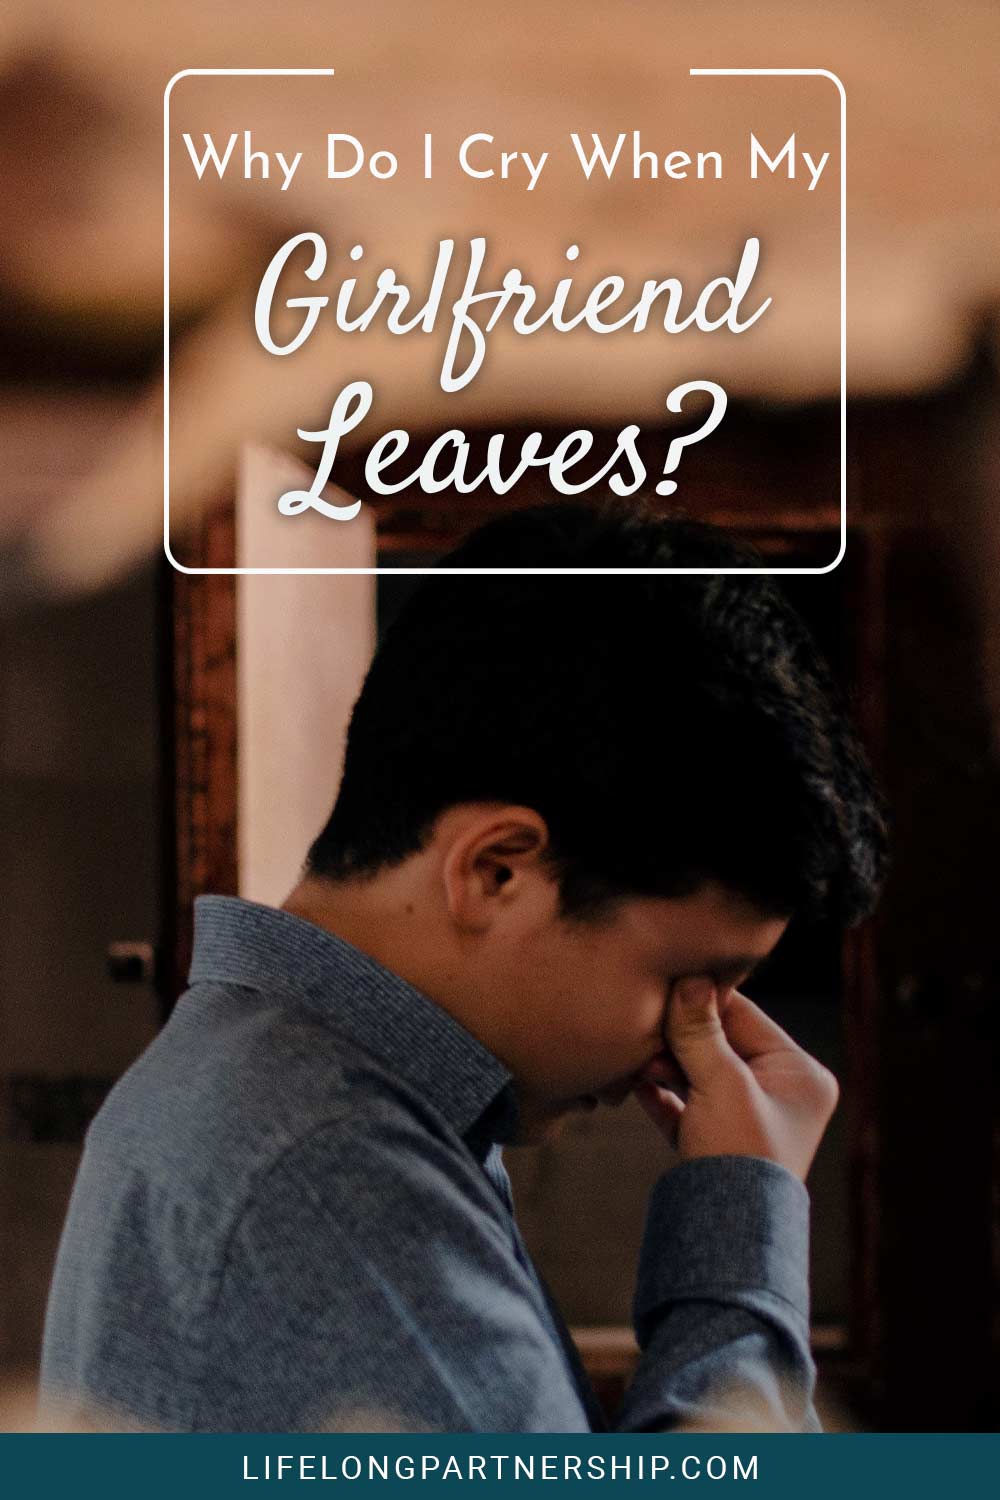 Why Do I Cry When My Girlfriend Leaves?